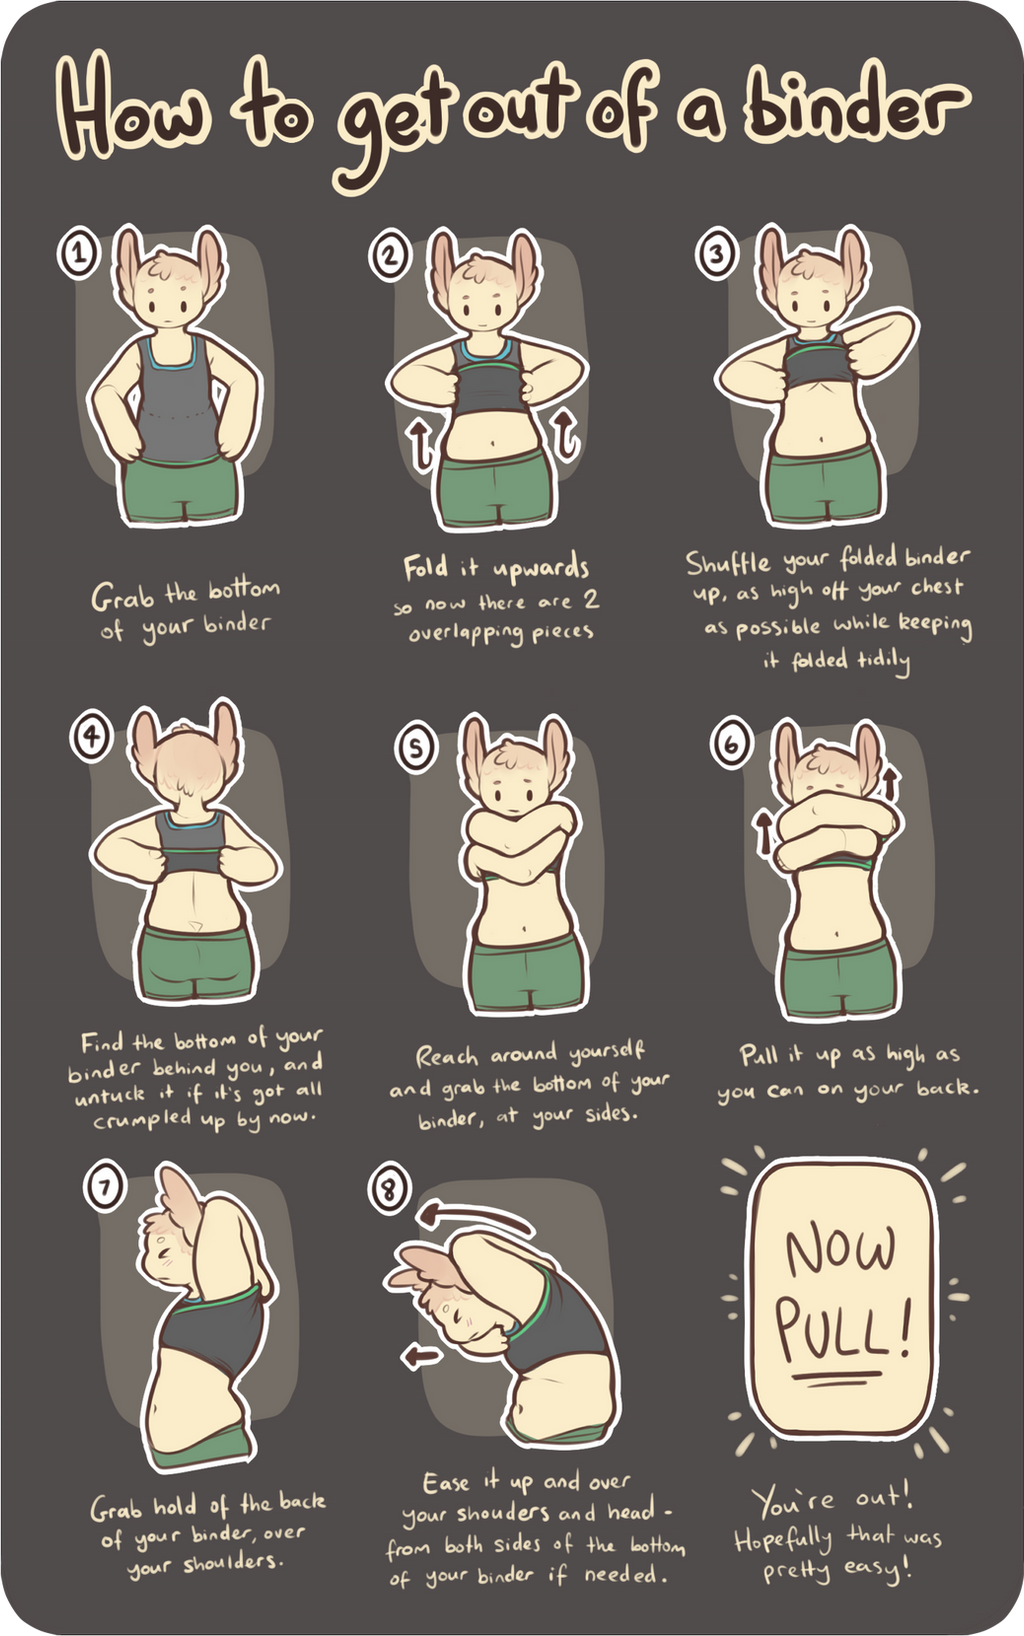 Tutorial - how to take off / get out of a binder by oddsocket on DeviantArt